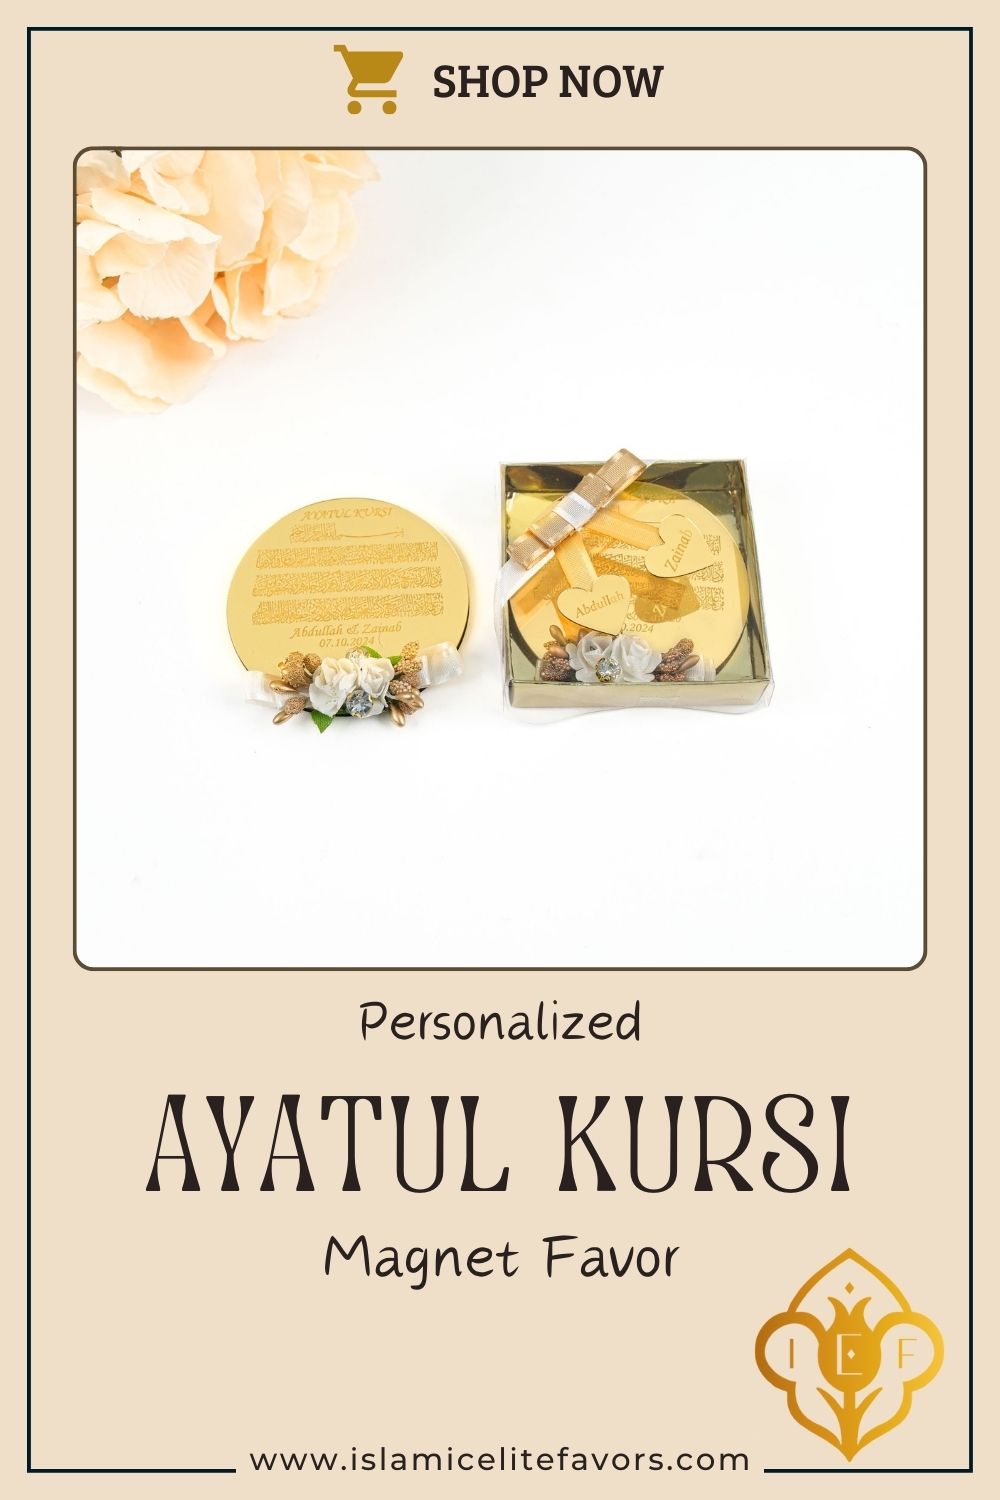 Personalized Ayatul Kursi Wedding Magnet Islamic Bridal Shower Favor. Explore an exquisite collection of customized Islamic handmade gifts suitable for various occasions, including Weddings, Nikkah ceremonies, Engagements, Baby Showers, Bridal Showers, Birthdays, Ameen celebrations, Islamic parties, Ramadan, Eid, Hajj, Umrah, Mother’s Day, Father’s Day, Valentine’s Day, Anniversaries, and Graduations. Each gift is thoughtfully crafted to reflect the essence of these special moments.